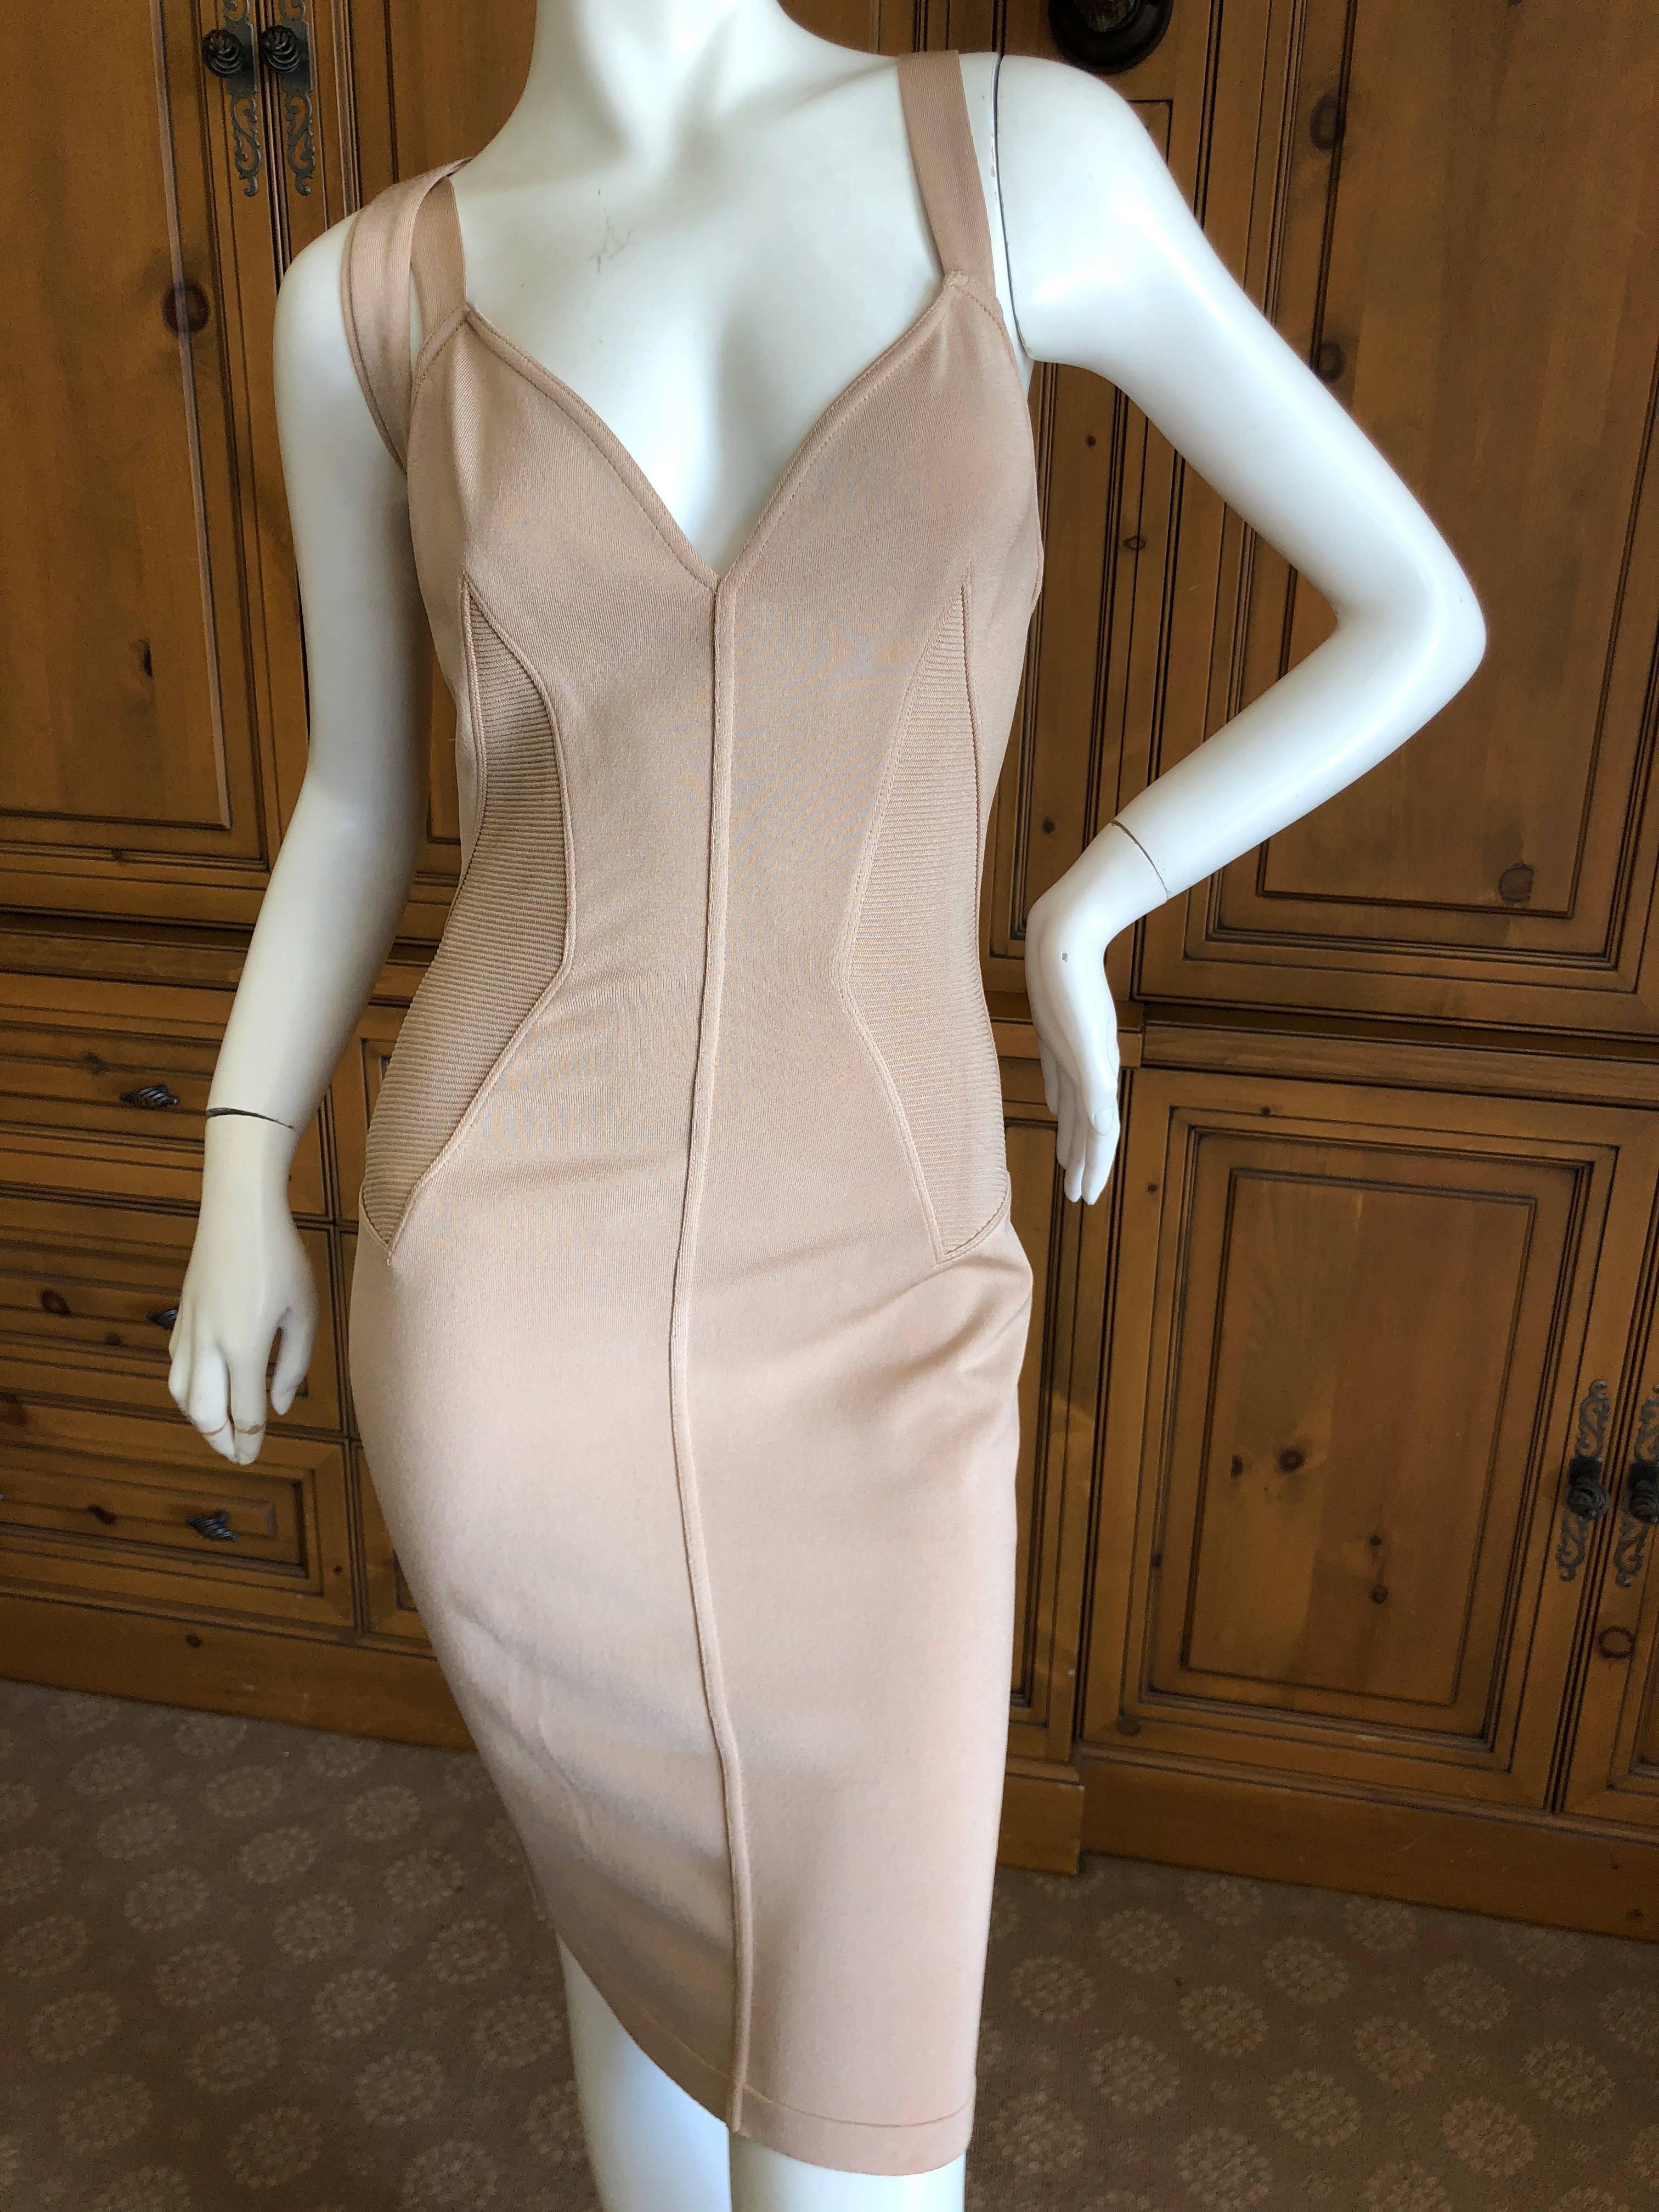 Women's Azzedine Alaia  Vintage 1980's Tan Cross Back  Dress with  Inserts New with Tags For Sale